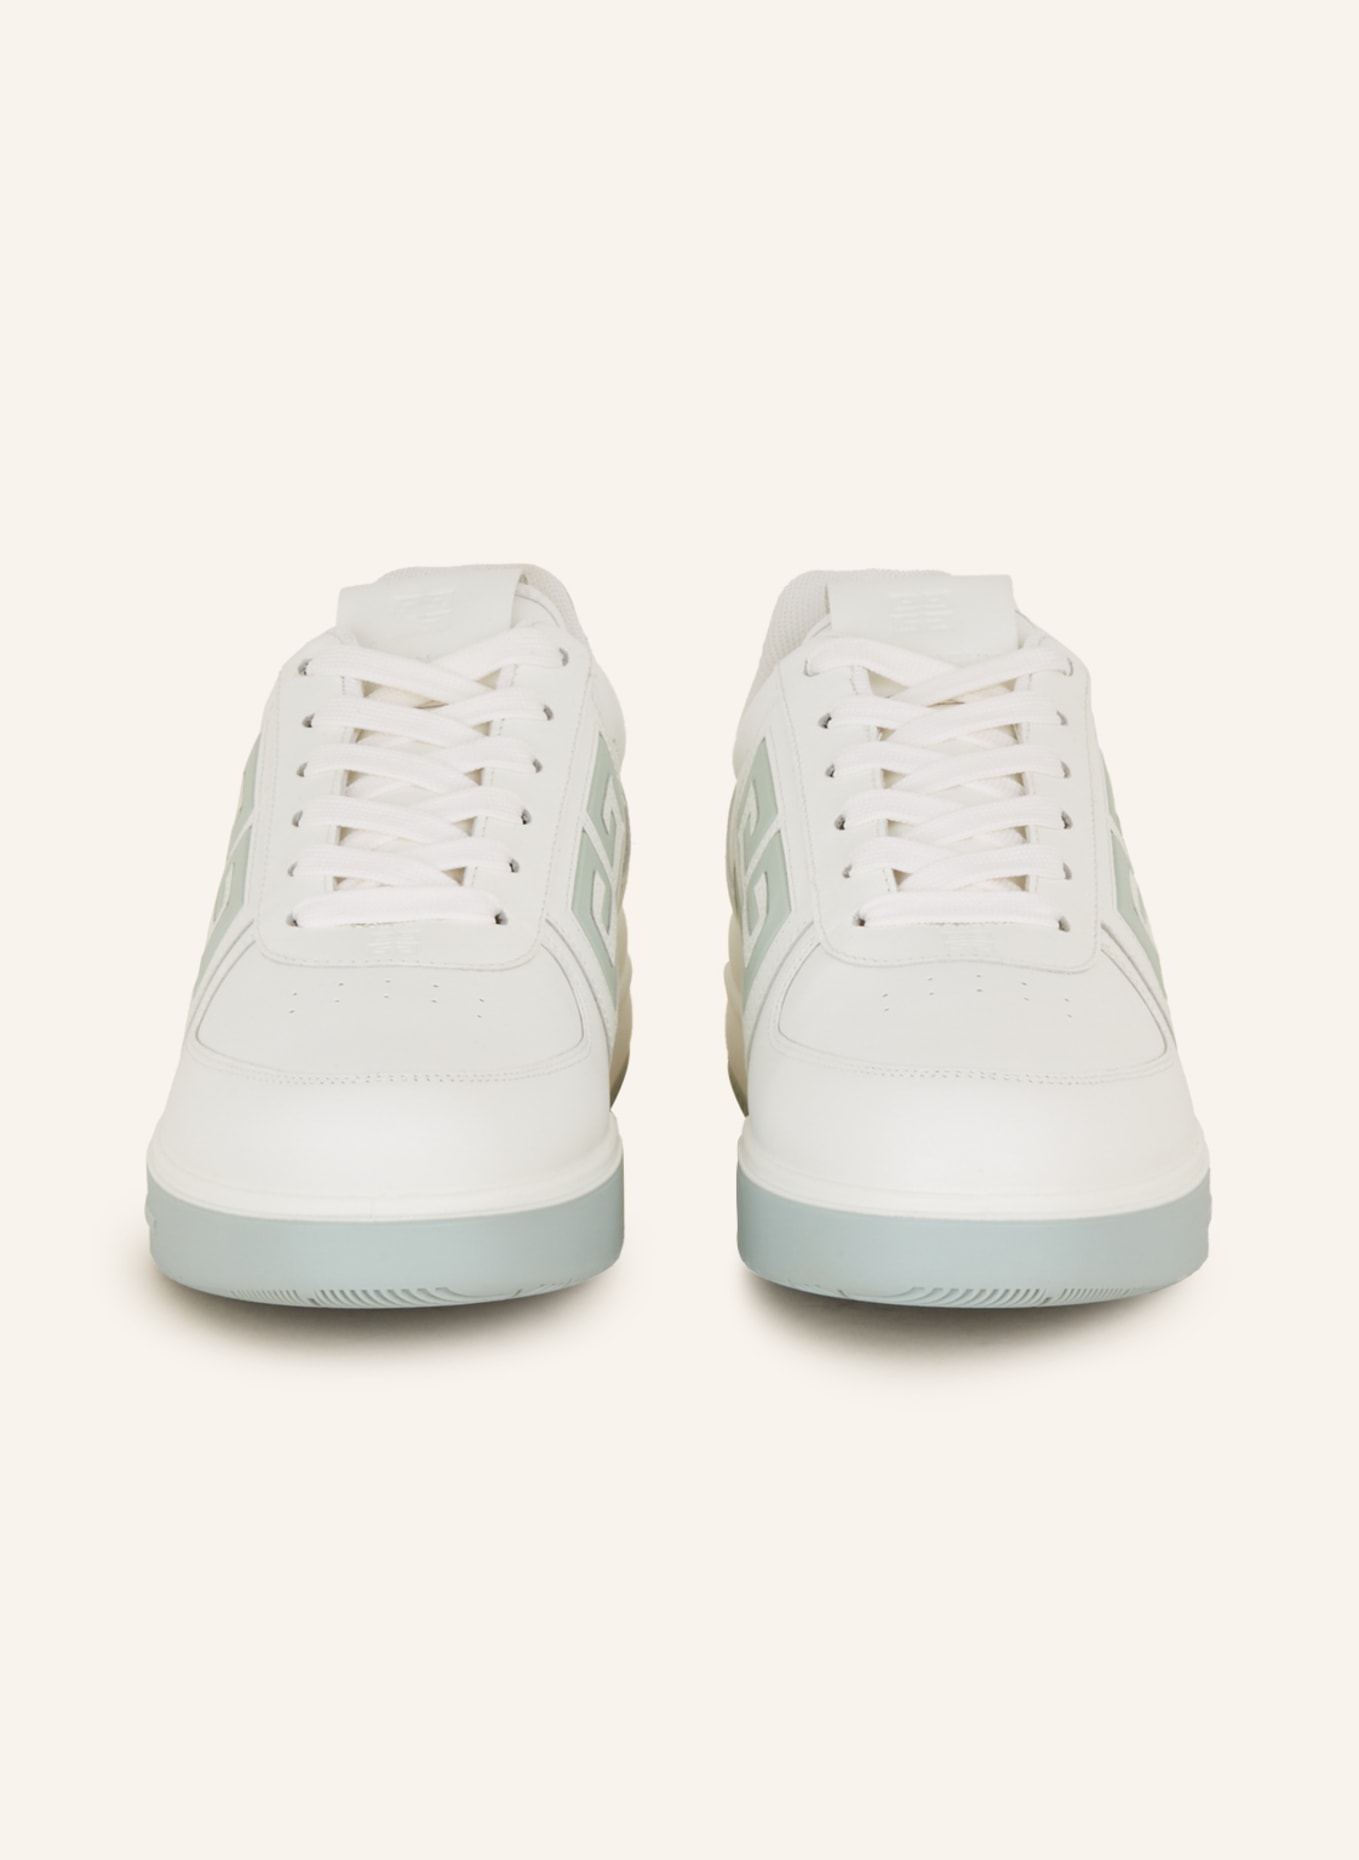 GIVENCHY Sneaker G4 , Farbe: WEISS/ MINT (Bild 3)